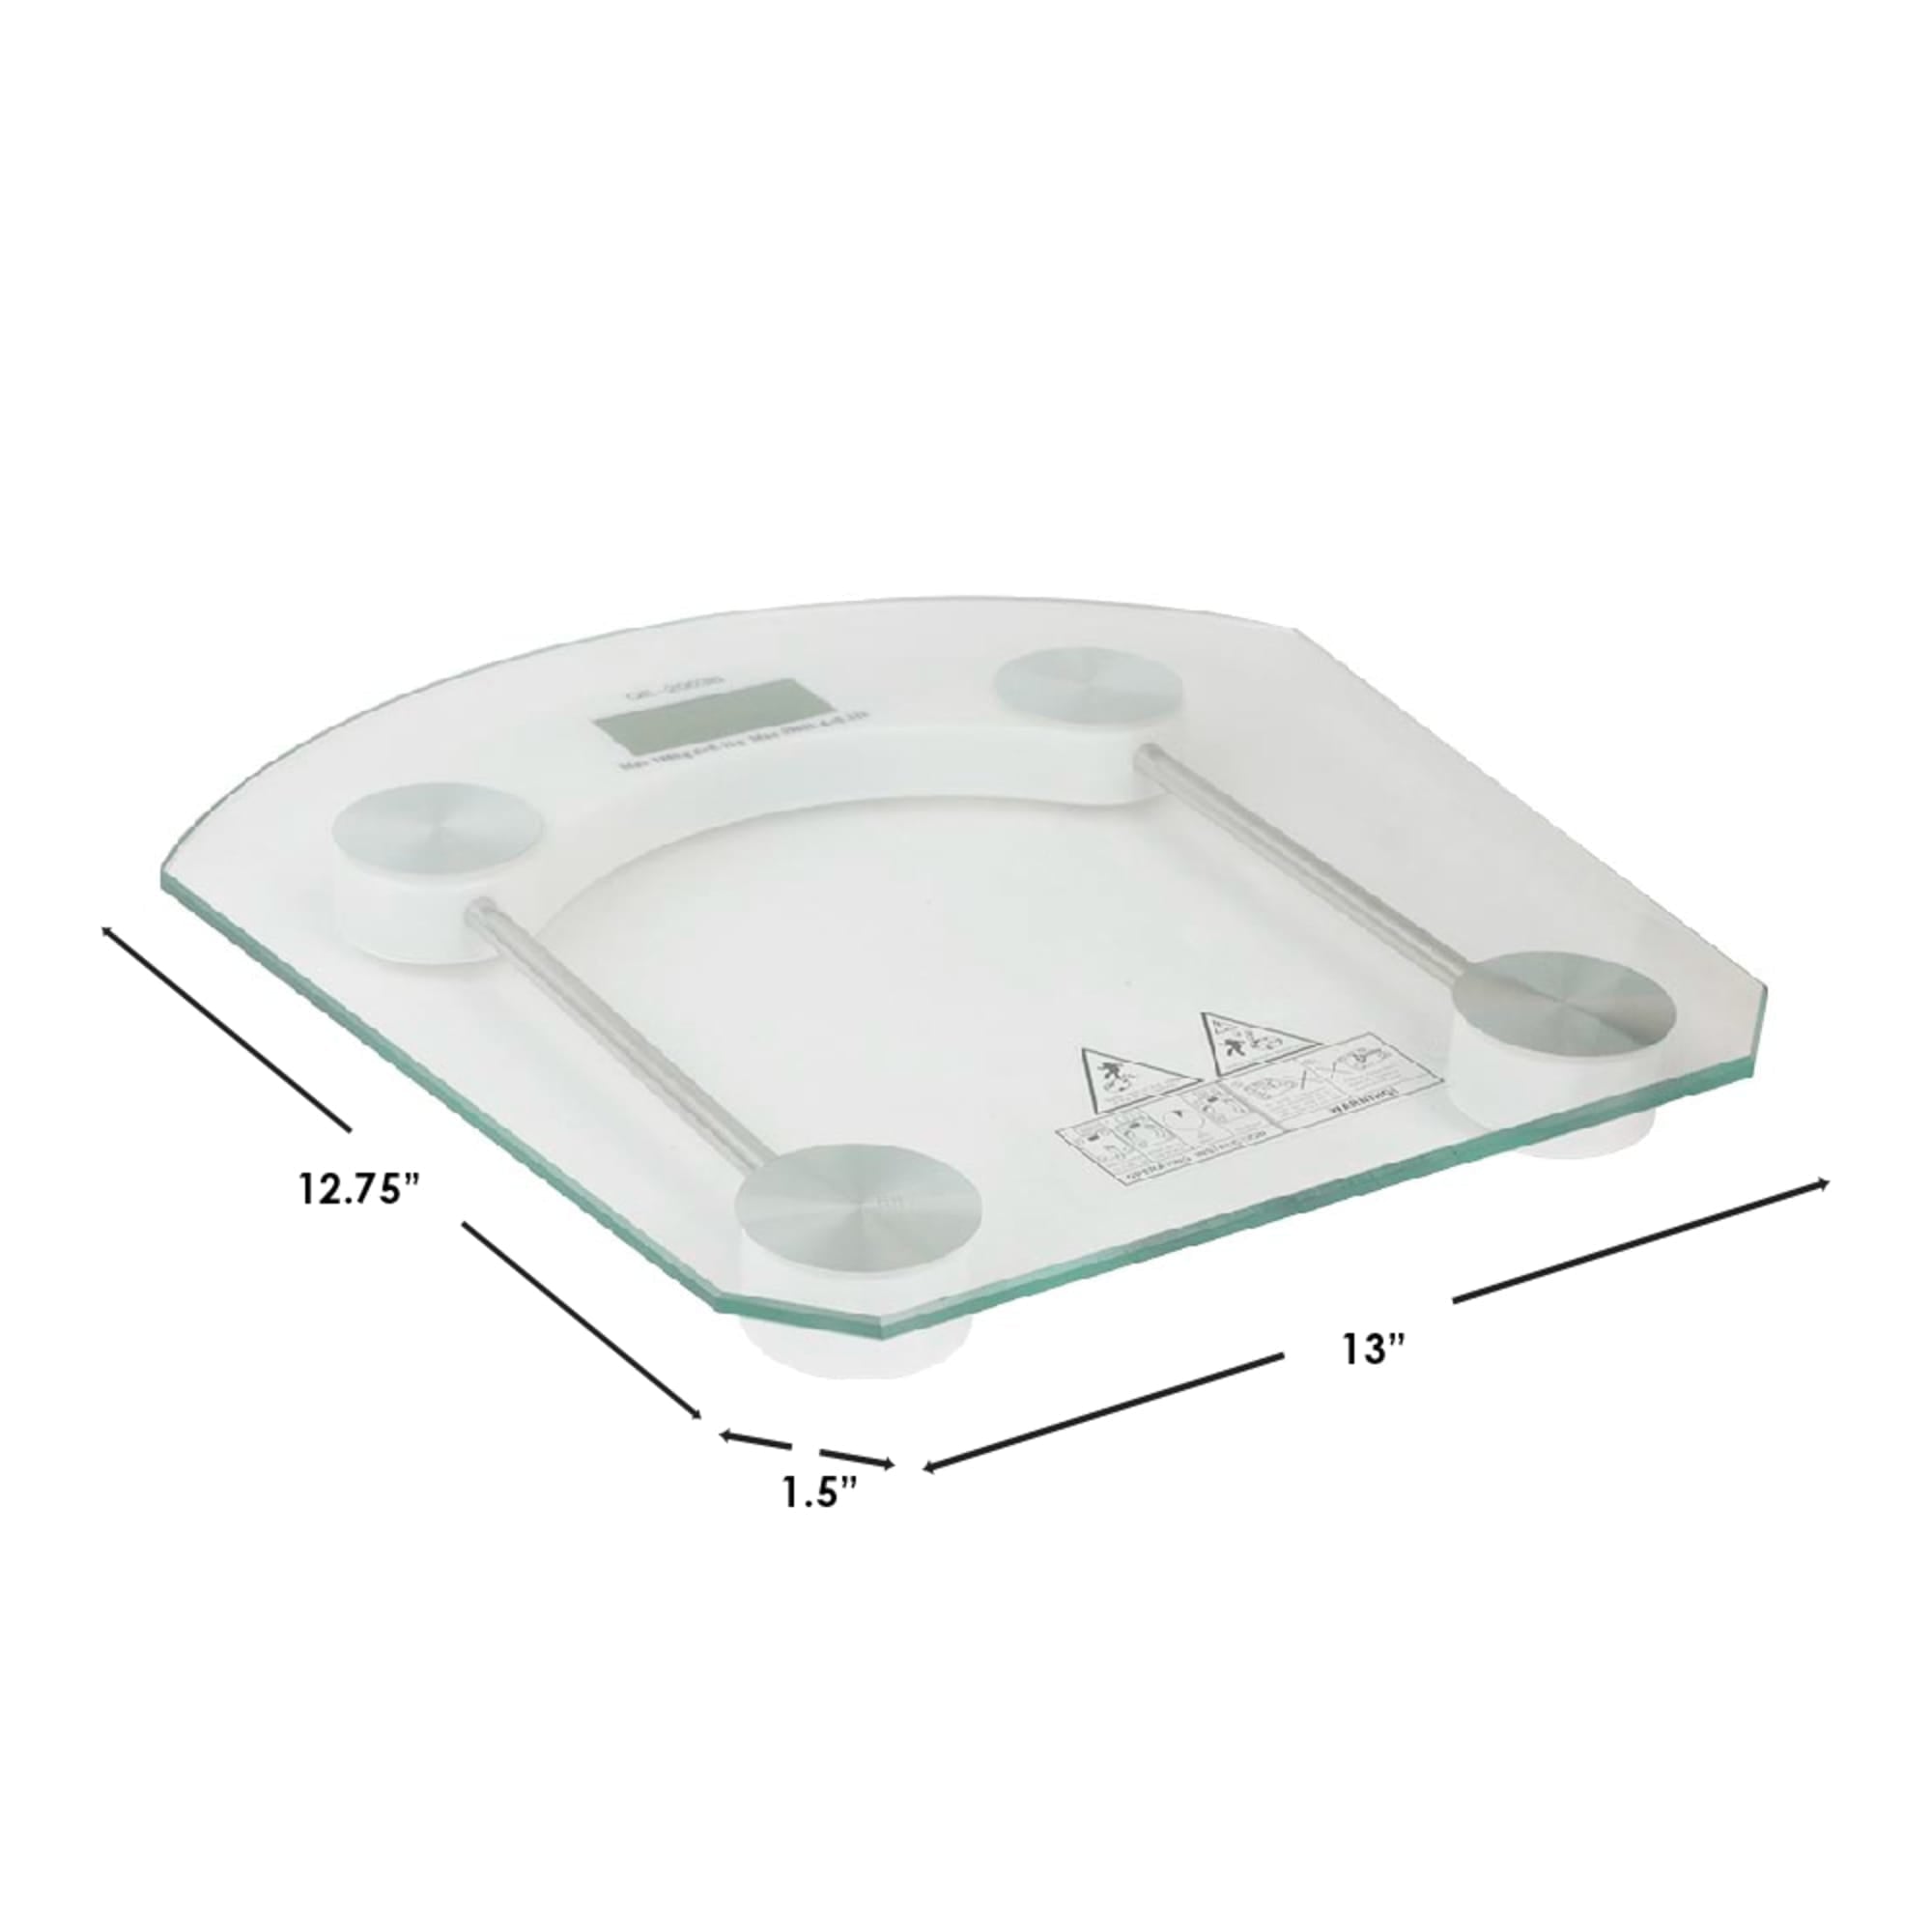 Home Basics Glass Digital Bathroom Scale for Body Weight $10.00 EACH, CASE PACK OF 8